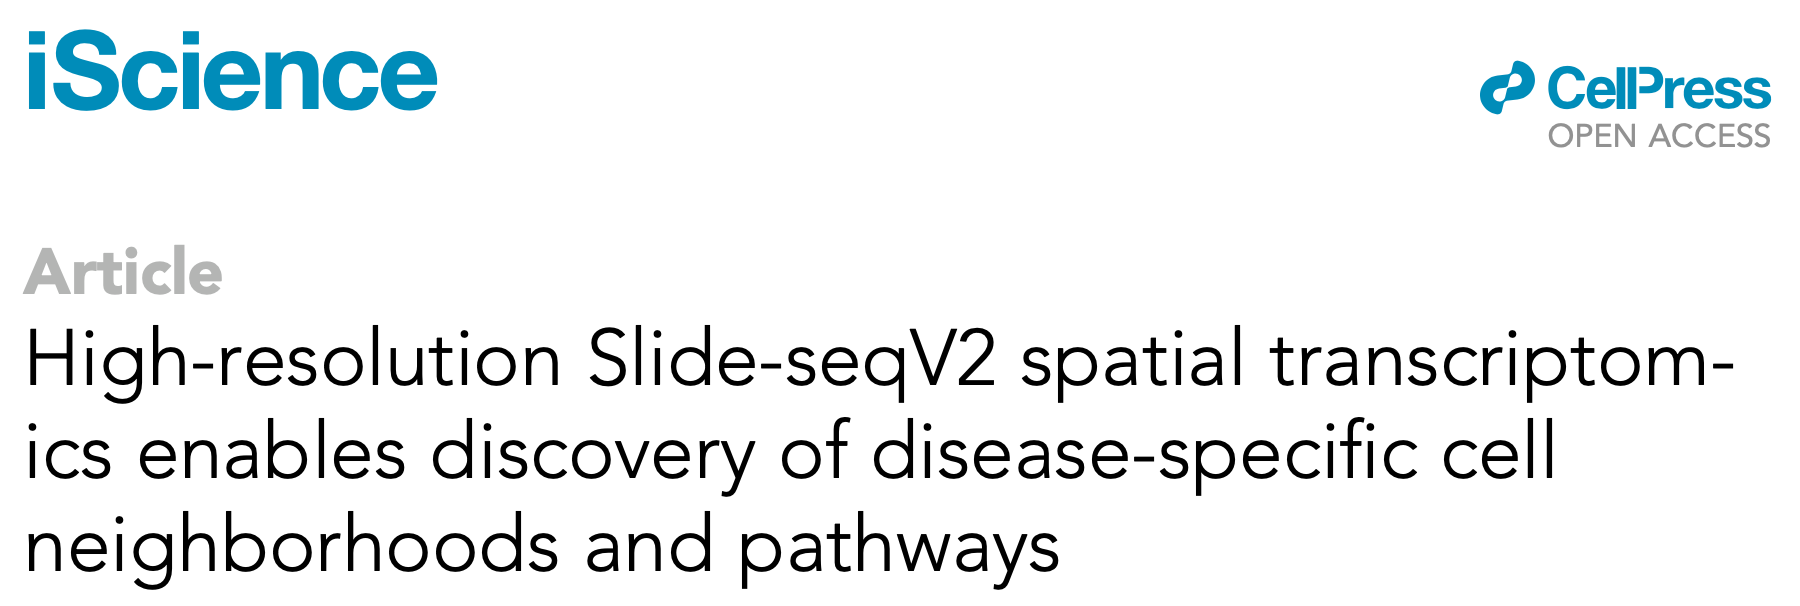 [Mar 16, 2022] Our collaborative work on dissecting kidney diseases using spatial transcriptomics is published!